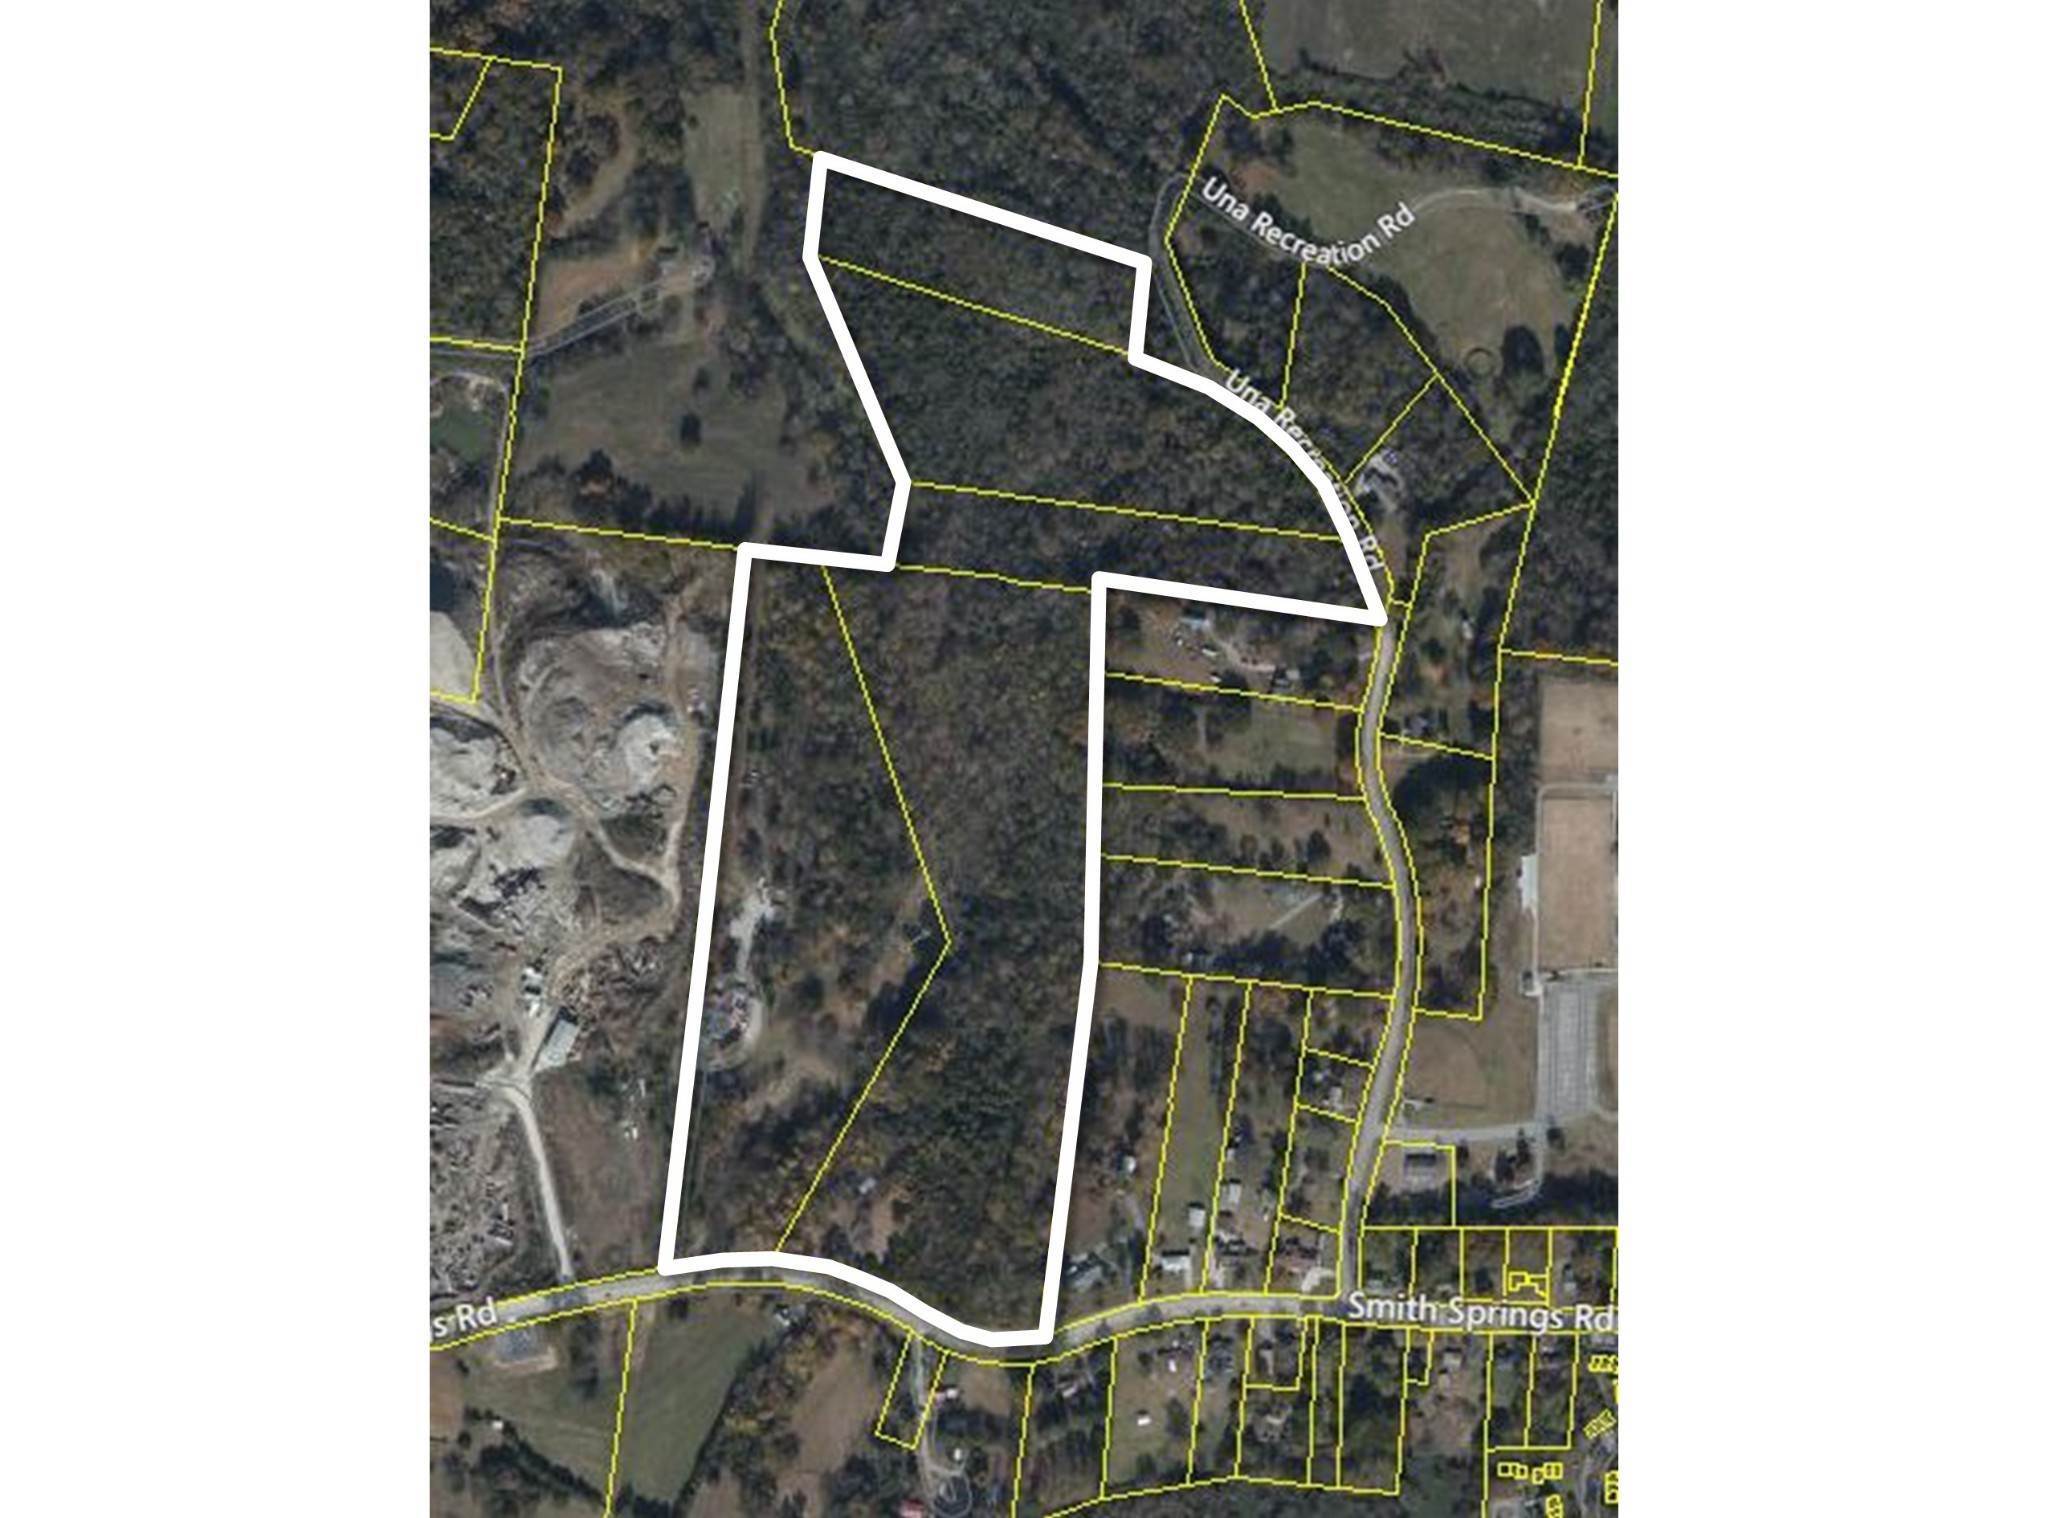 2. Land for Sale at 2152 Smith Springs Road Nashville, Tennessee 37217 United States